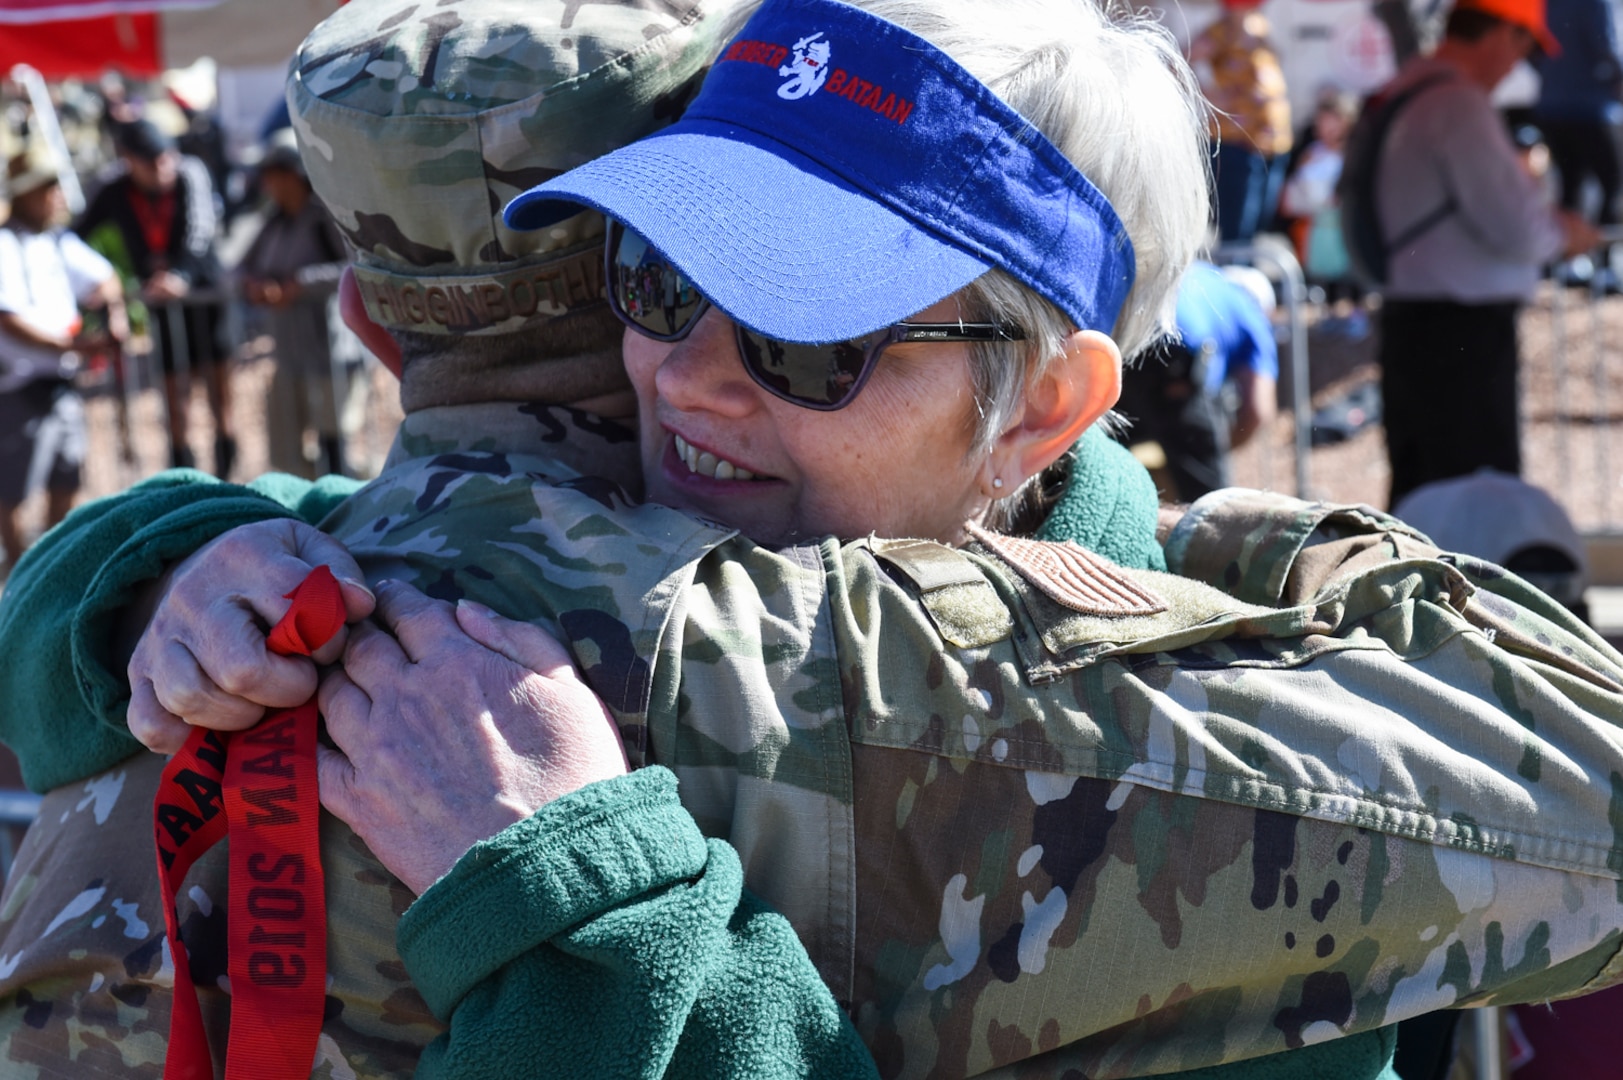 Beth Bania hugs Chief Master Sgt. Benjamin Higginbotham after DIA's command senior enlisted leader presented her with the medal he received for completing the 2019 Bataan Memorial Death March, March 17. Beth, and her sister Kay, drove all the way from Michigan to attend their first march and to finally meet Higginbotham, who has honored their father each of the last four years.